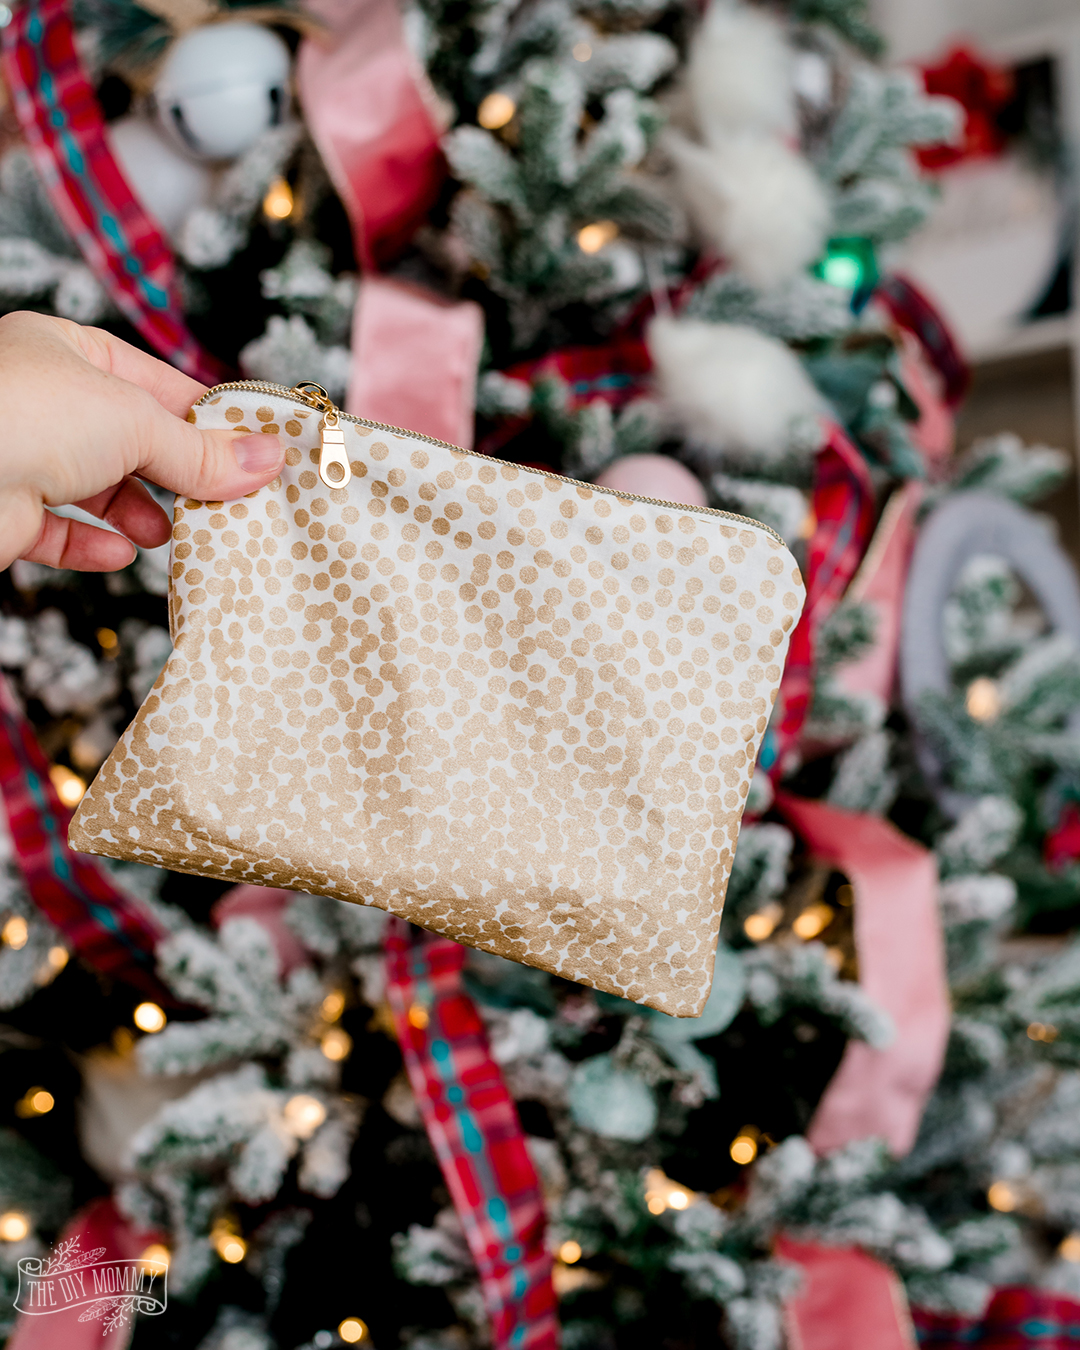 A cute little DIY zippered pouch with gold poka dots and a gold zipper. This would be a lovely gift idea for a special teacher.